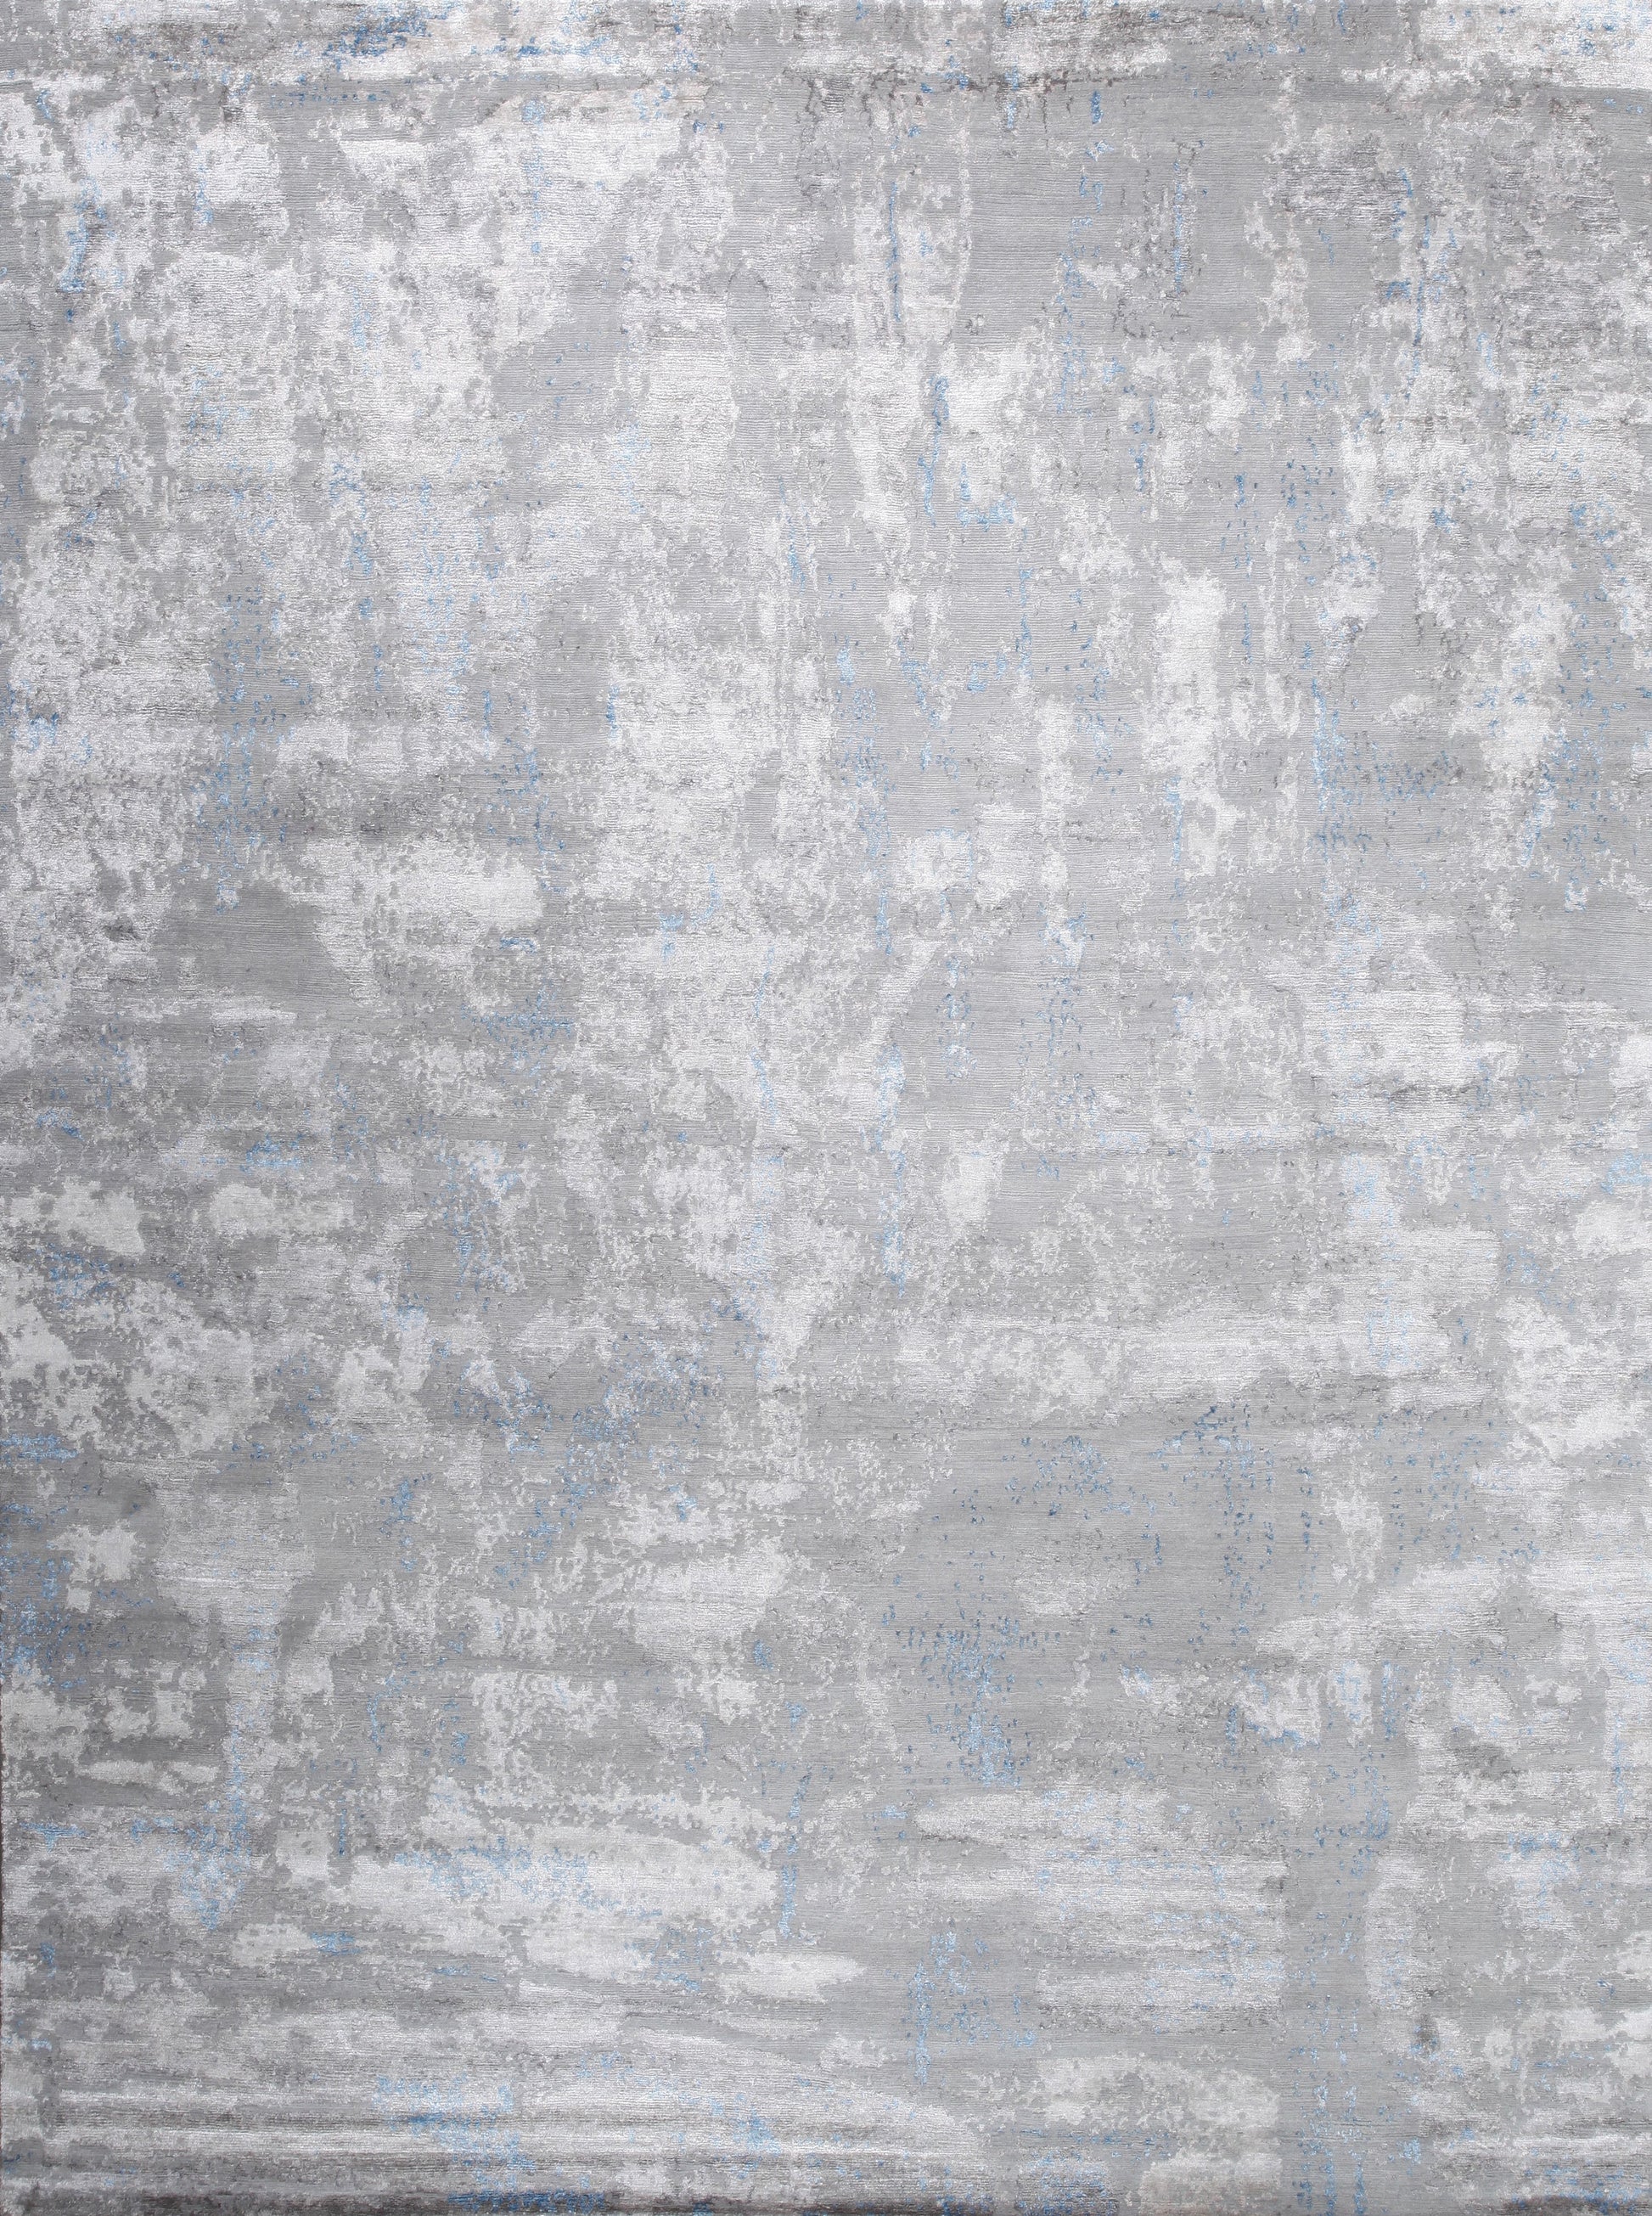 Modern rug in grayscale with blue accents.